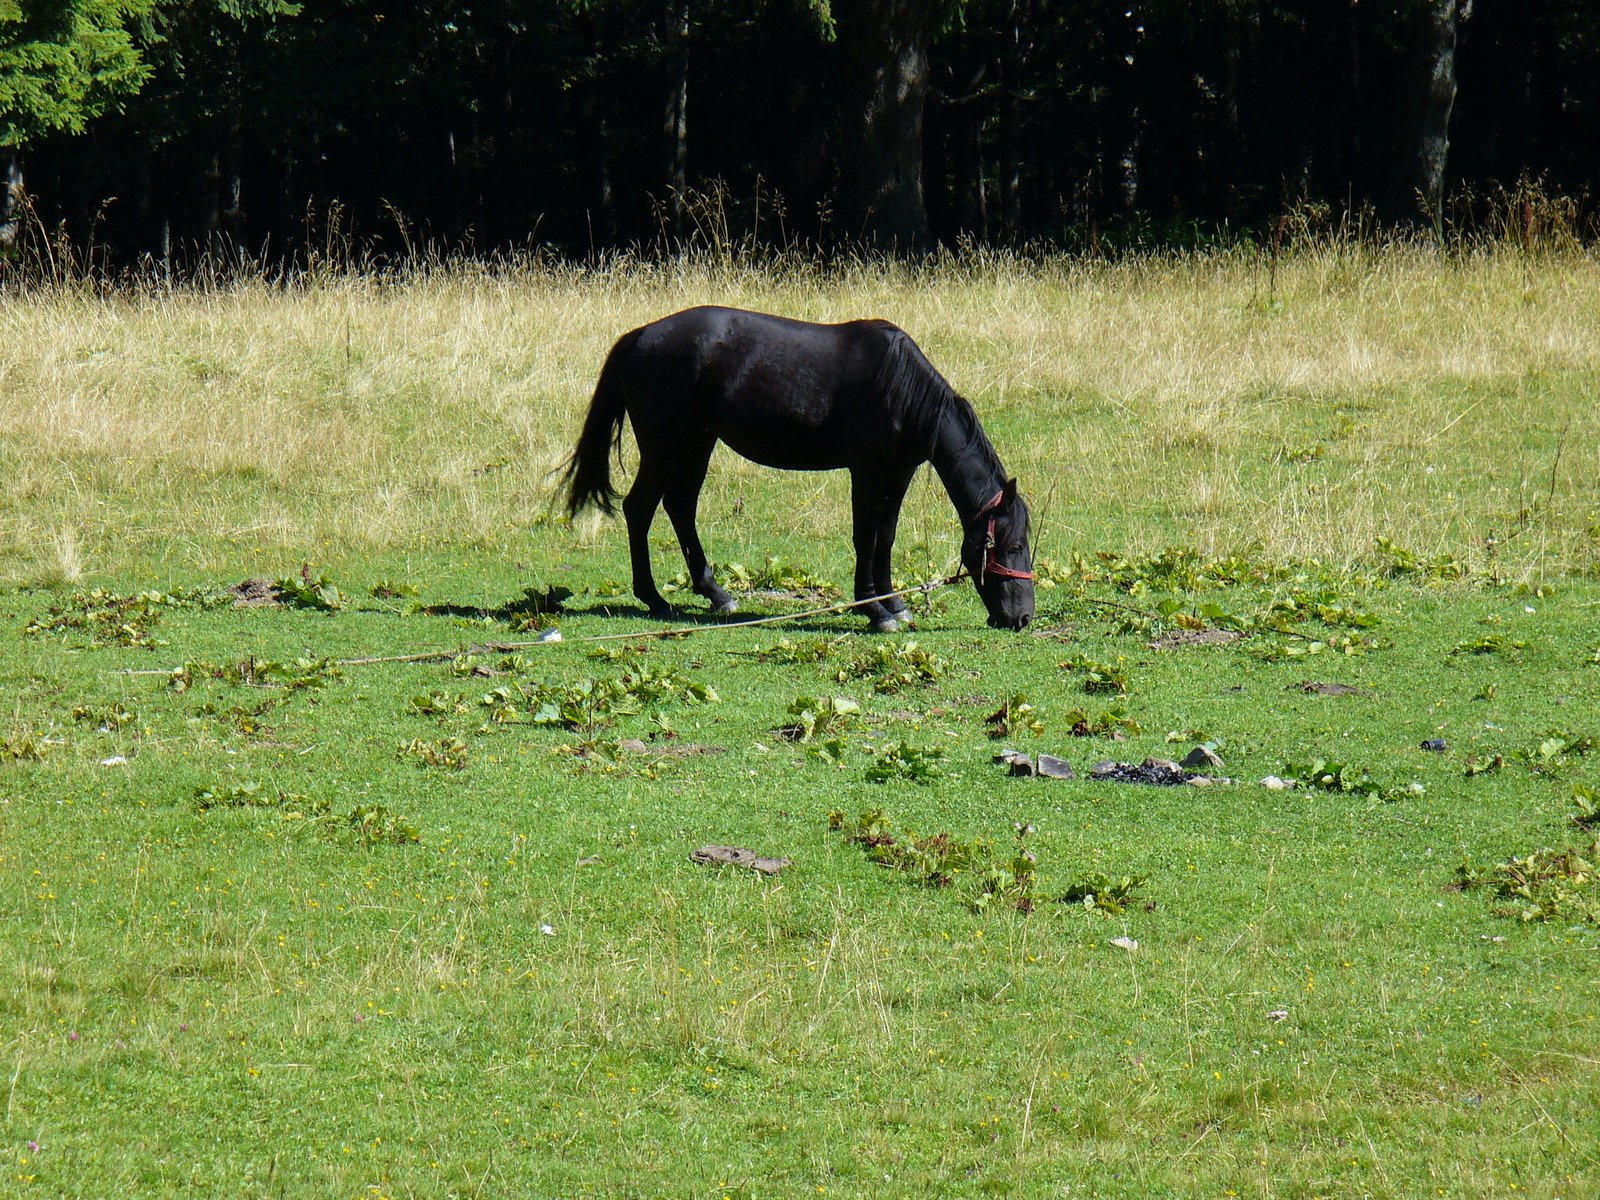 a horse grazing on grass in a field